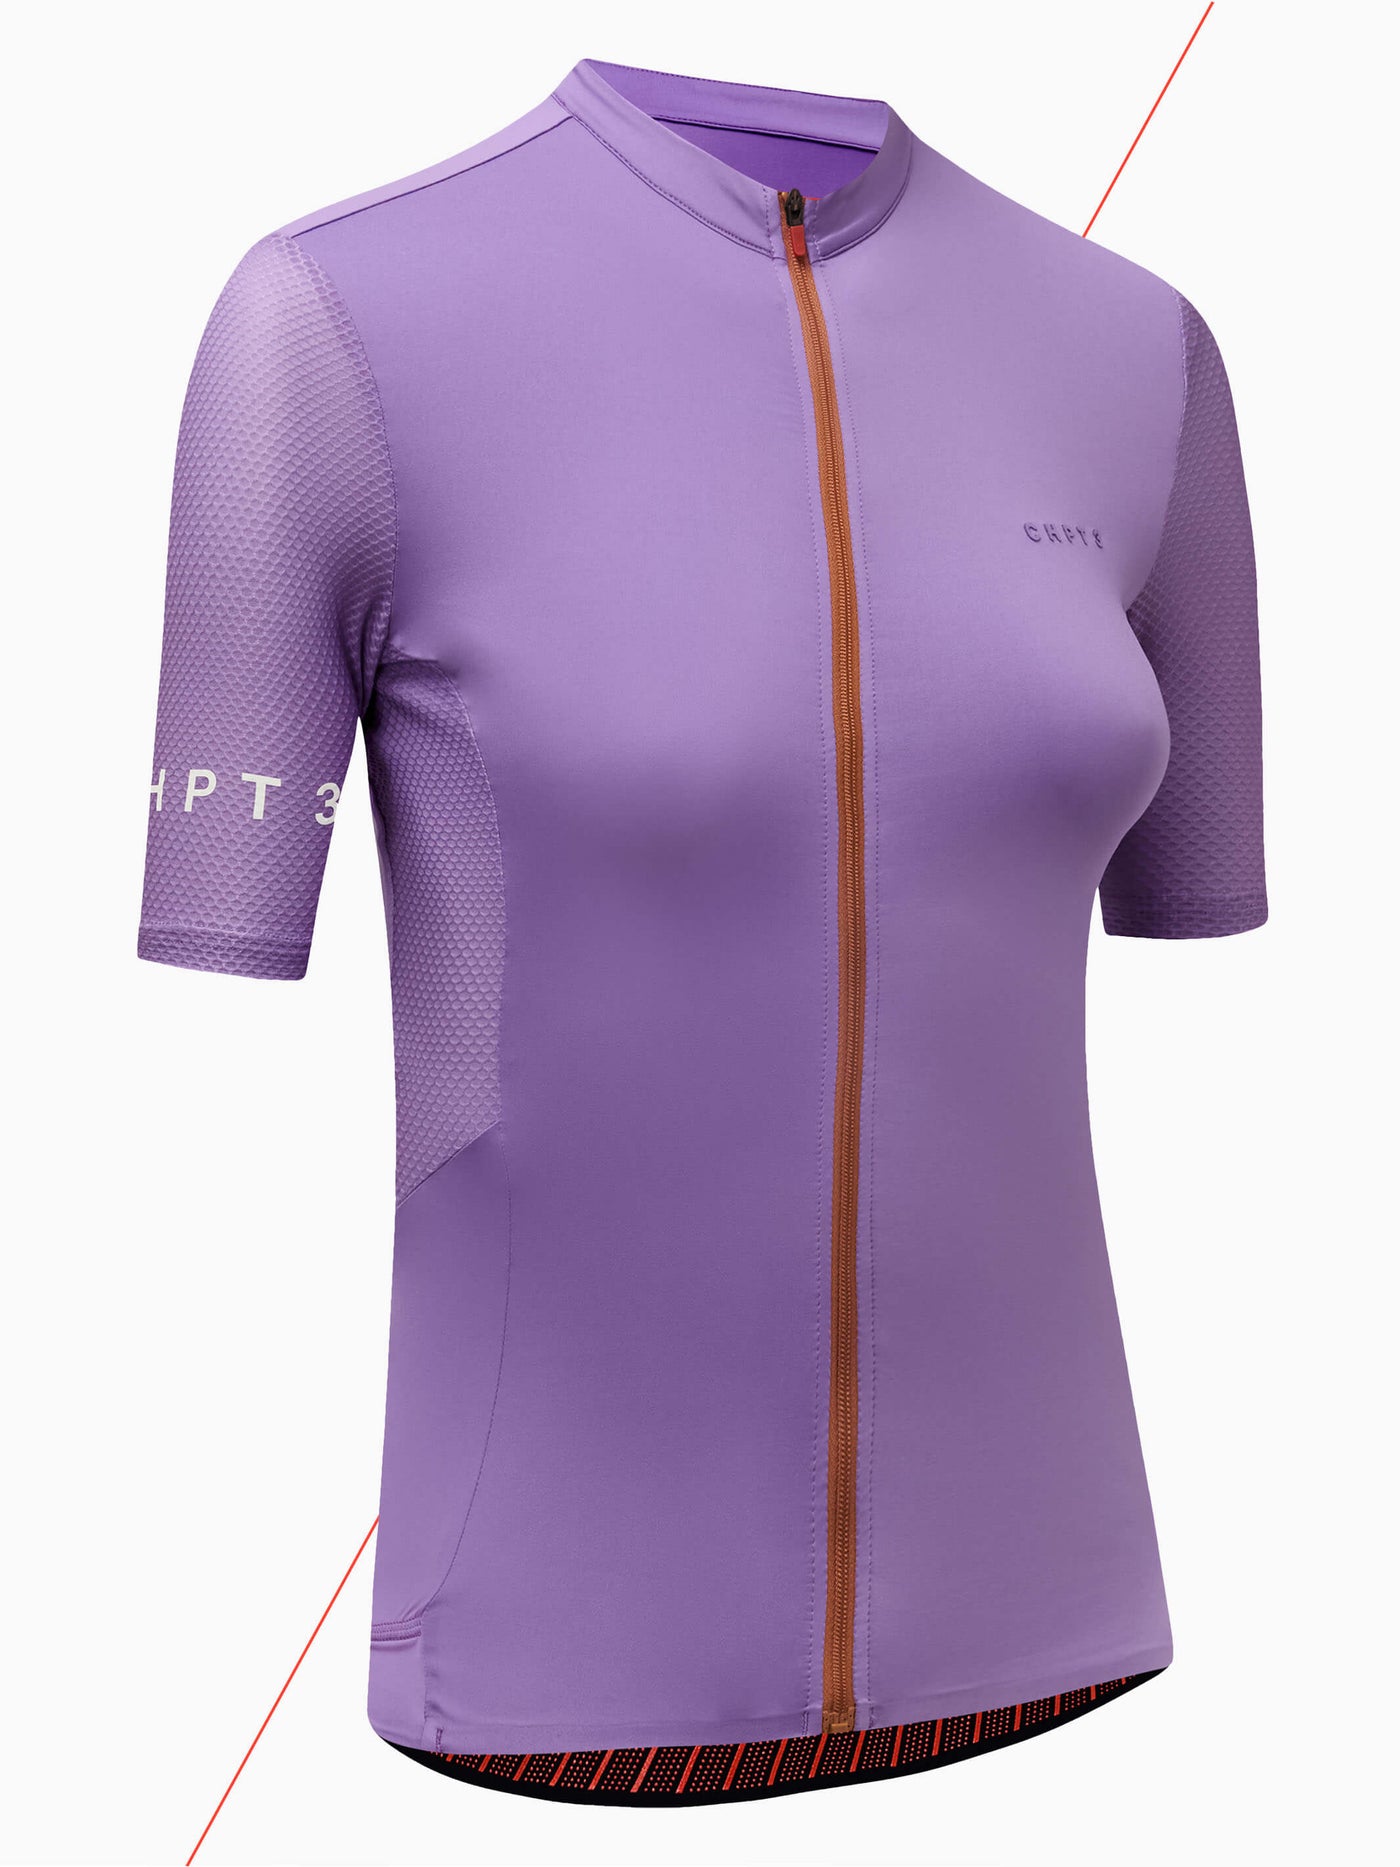 CHPT3 women's short sleeve Aero jersey, in Electric Lavender, viewed from side #color_electric-lavender